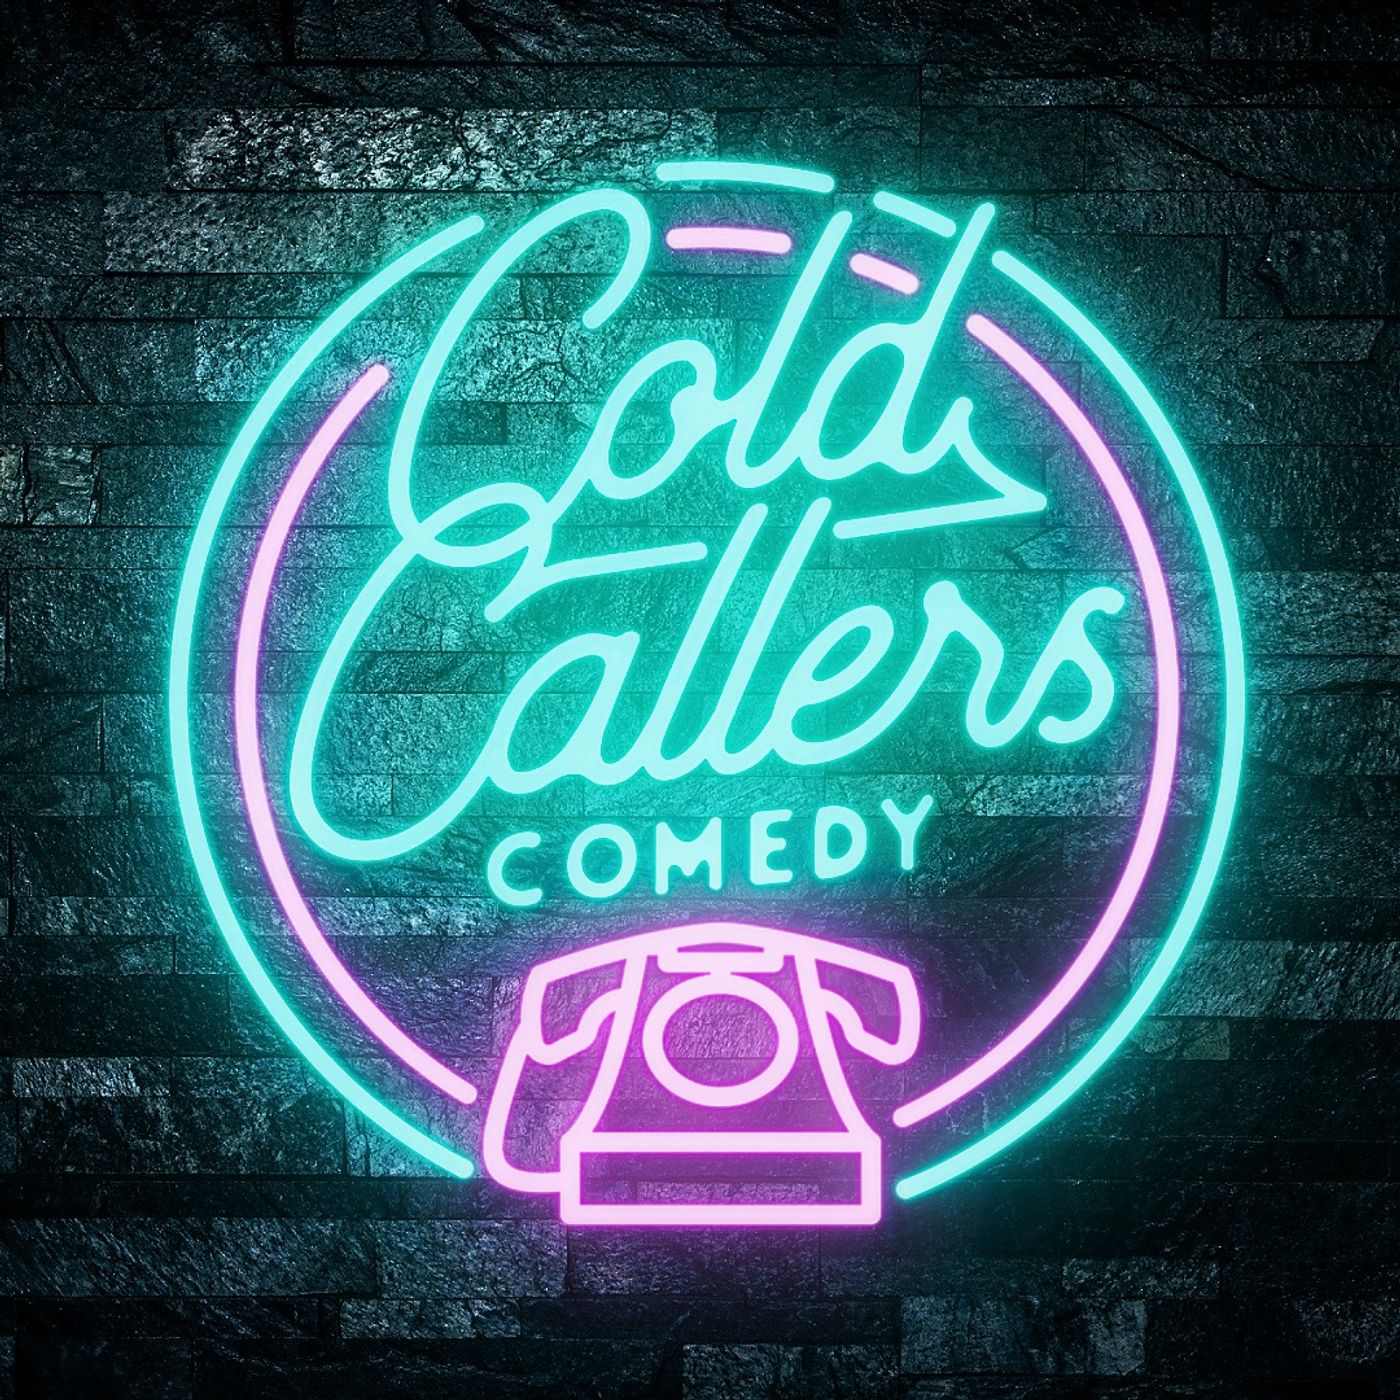 Console Wars by Cold Callers Comedy